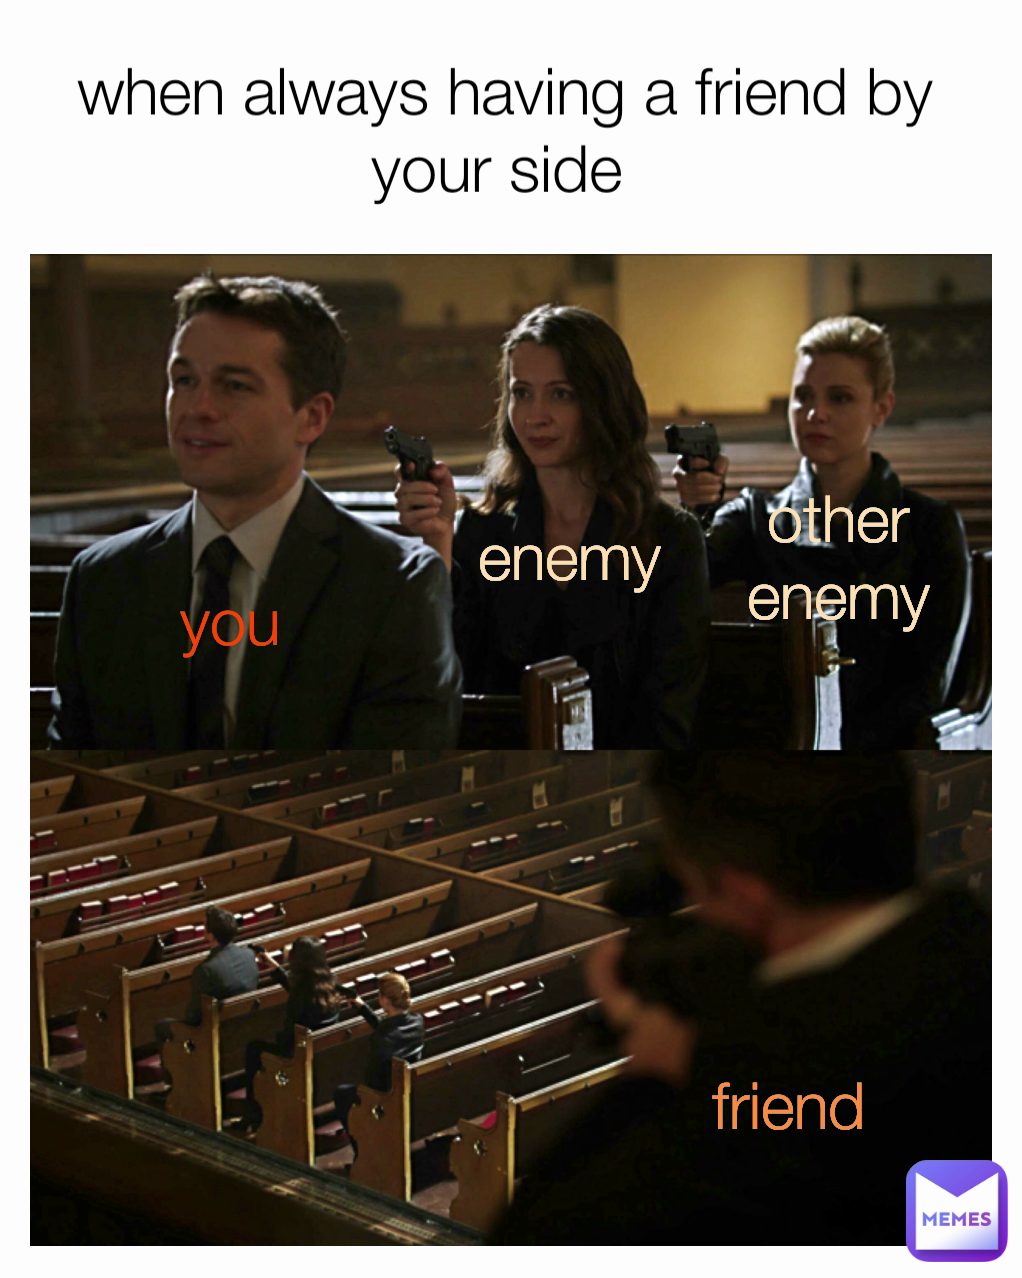 other enemy friend enemy 
 you when always having a friend by your side 